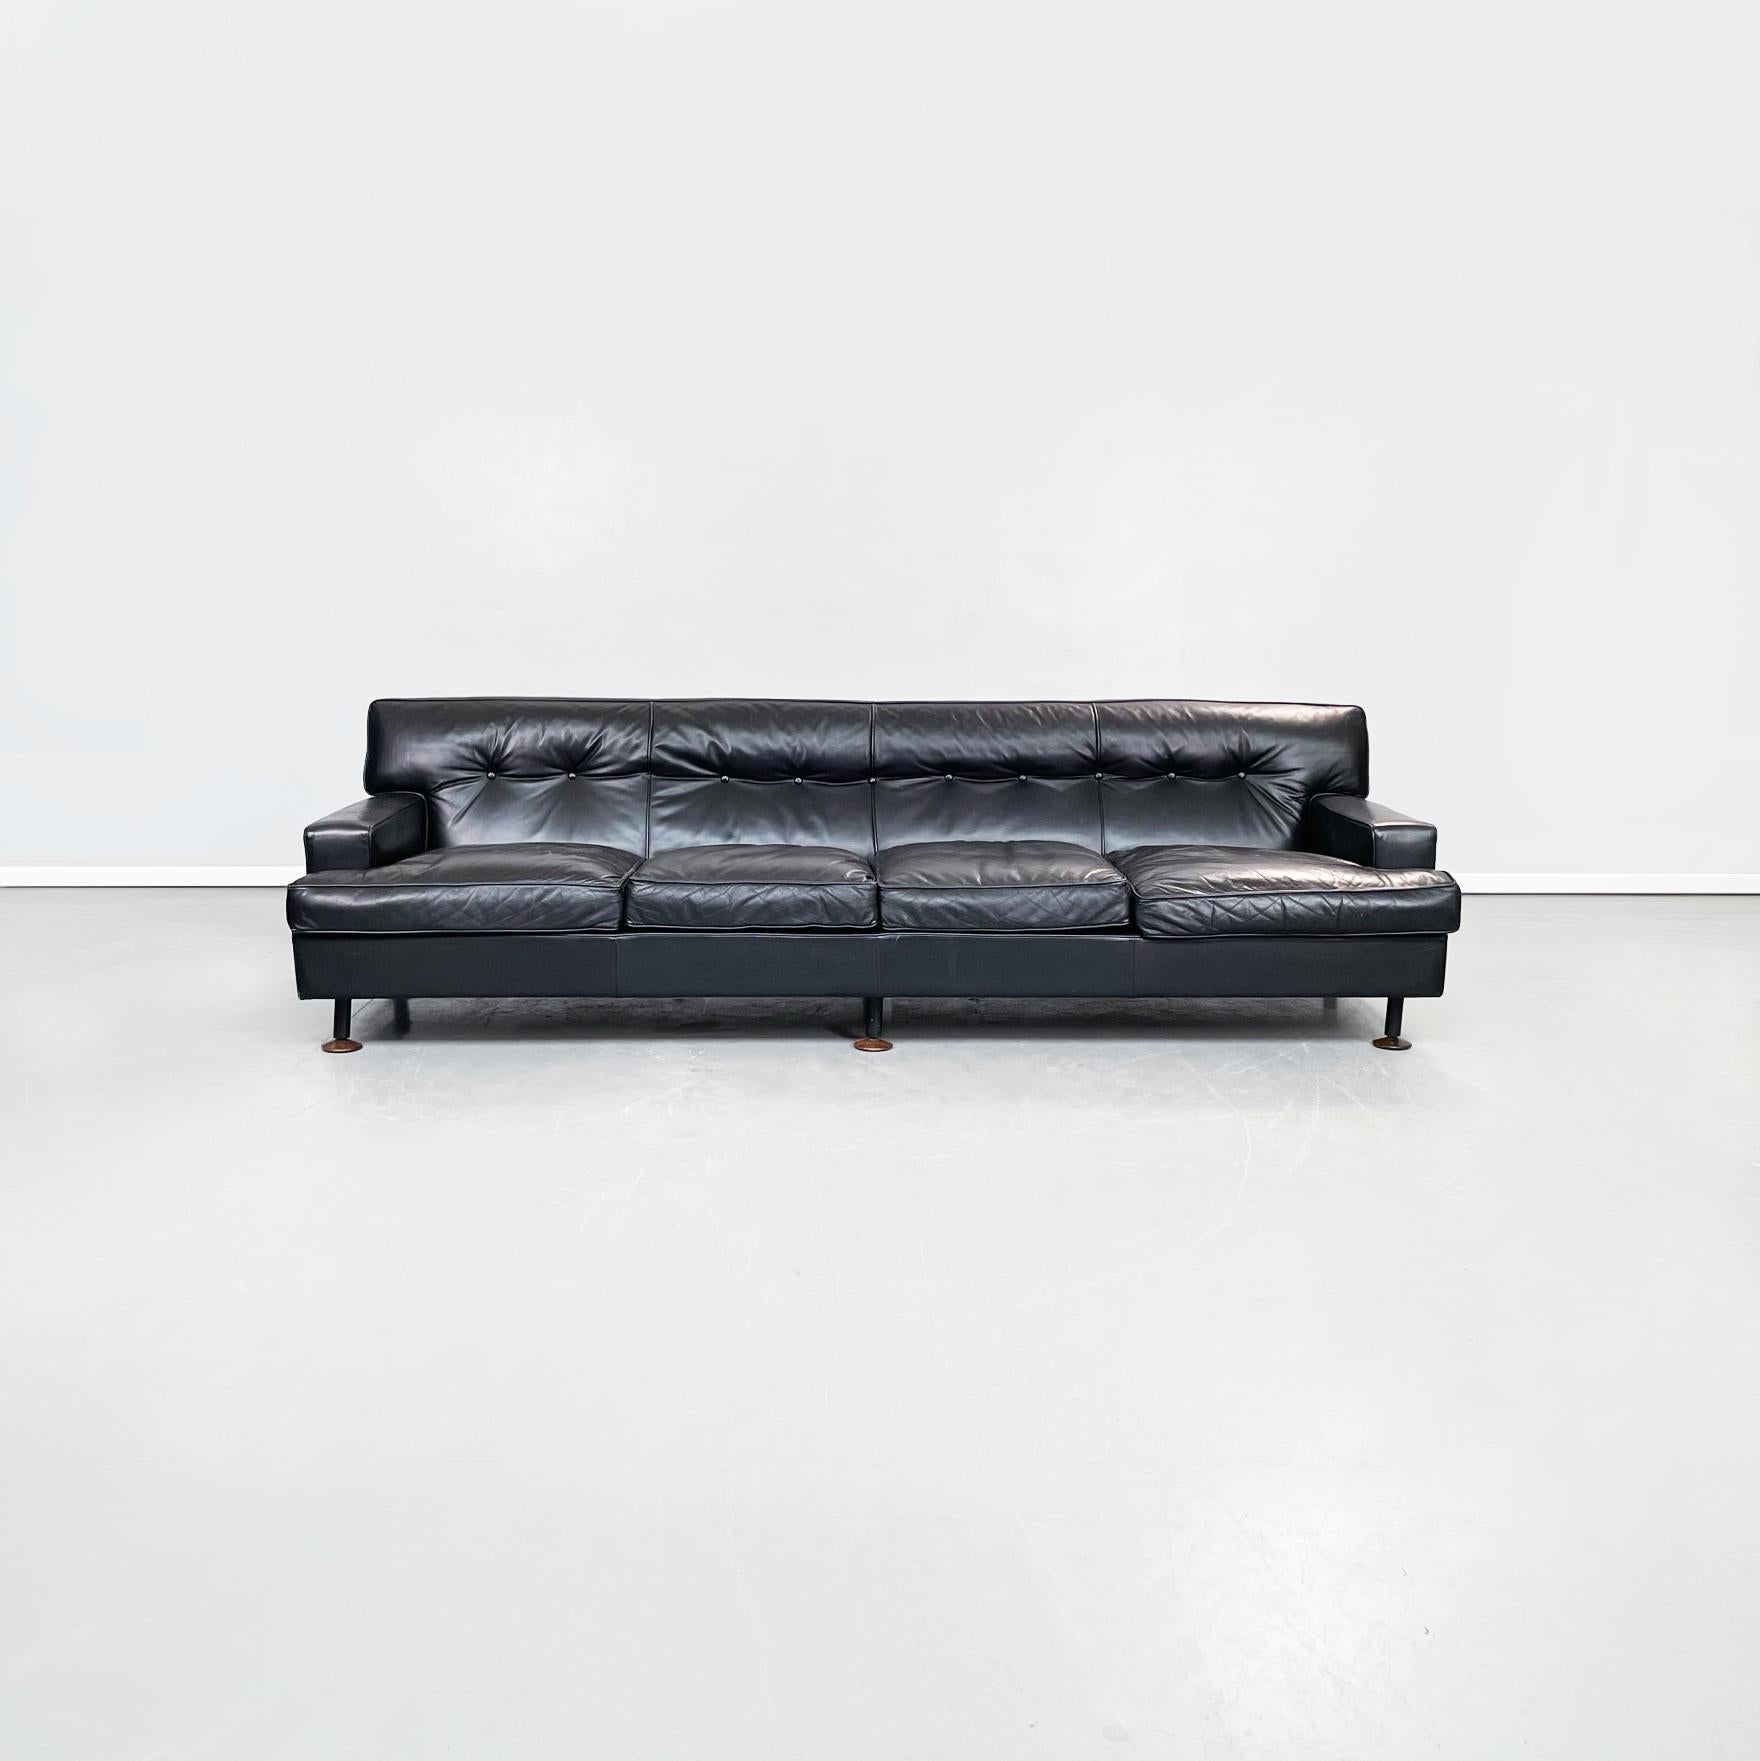 Italian mid-century black leather 4 seater Sofa Quadrato by Zanuso for Arflex, 1960s
4 Seater sofa mod. Quadrato (Square) in black leather. The seat is made up of 4 padded and leather cushions. Padded and covered in leather back, with buttons in